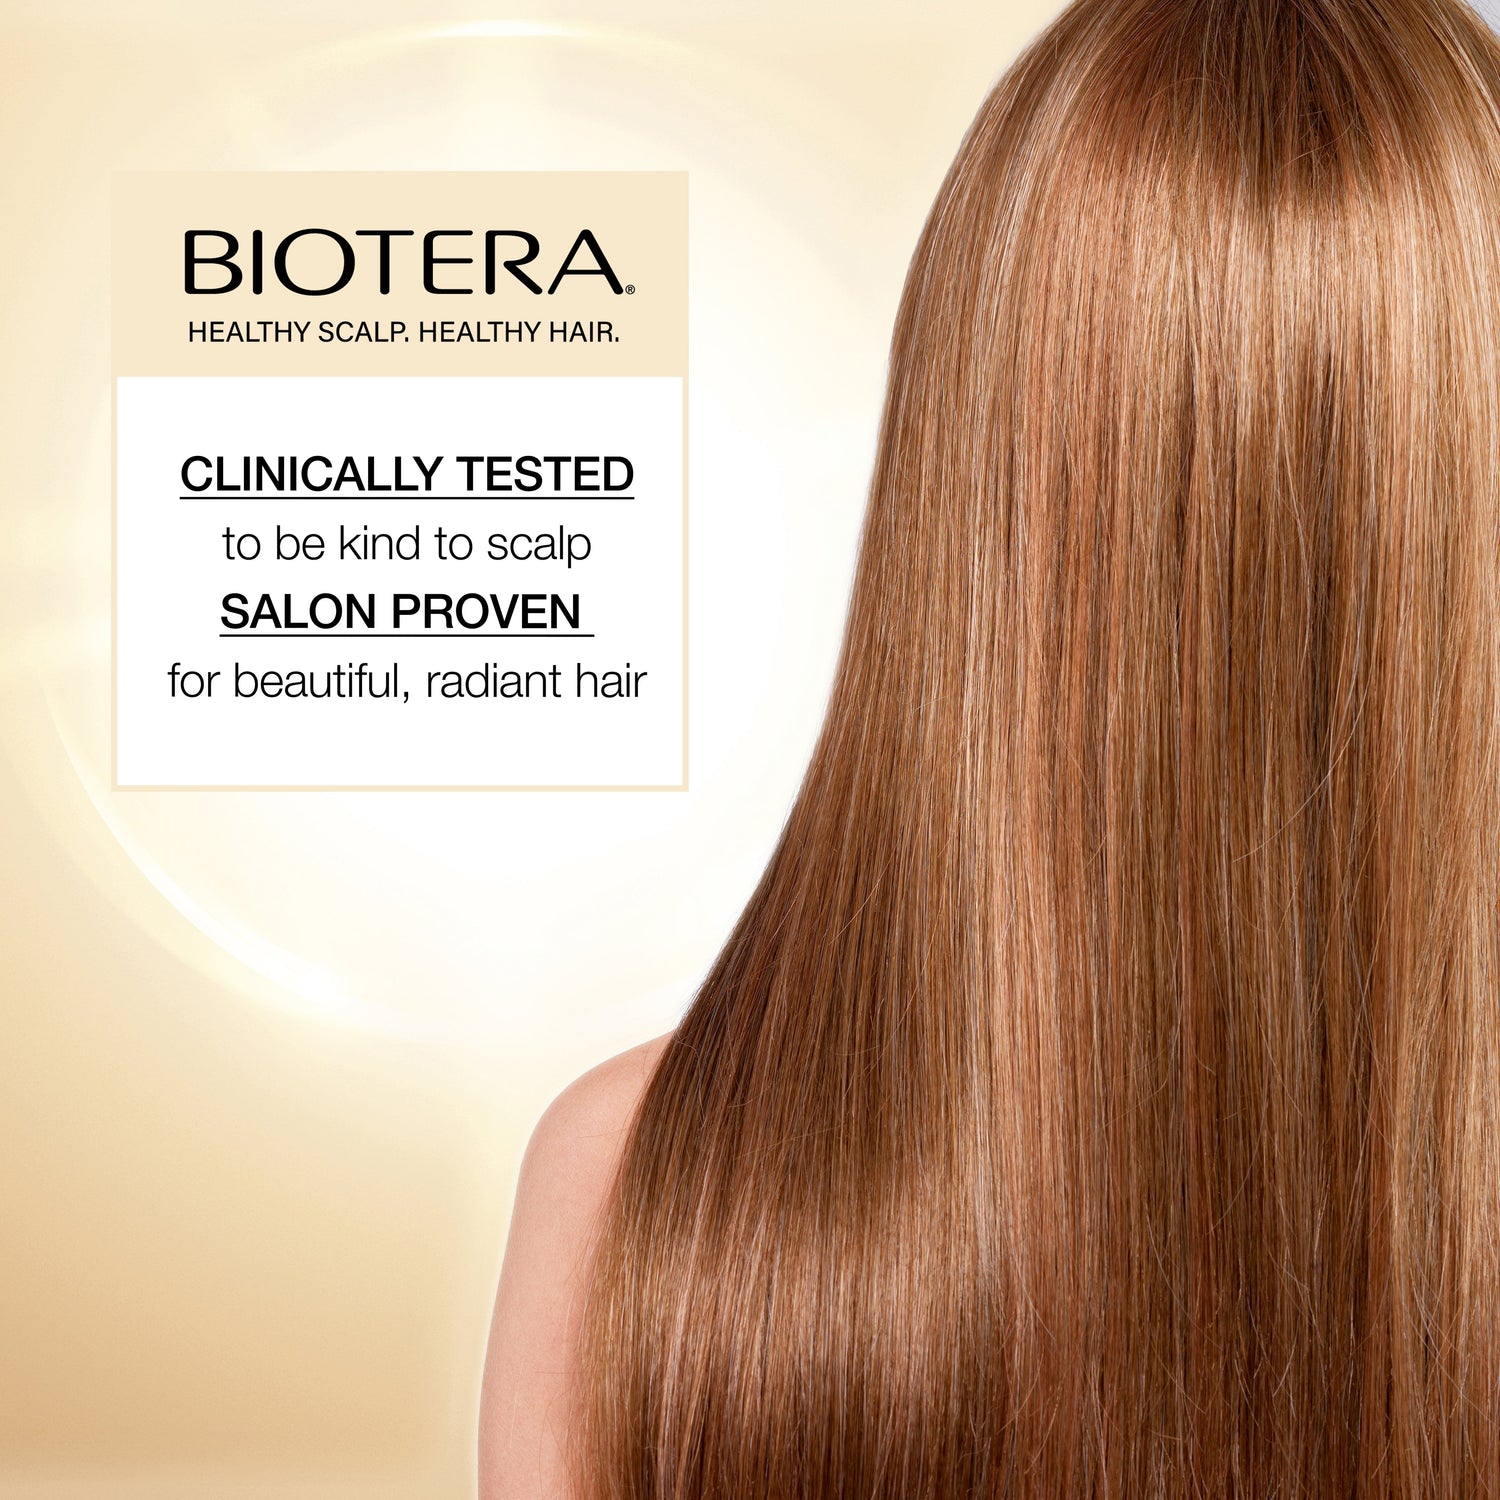 Biotera is clinically tested and salon proven for beautiful radiant hair.